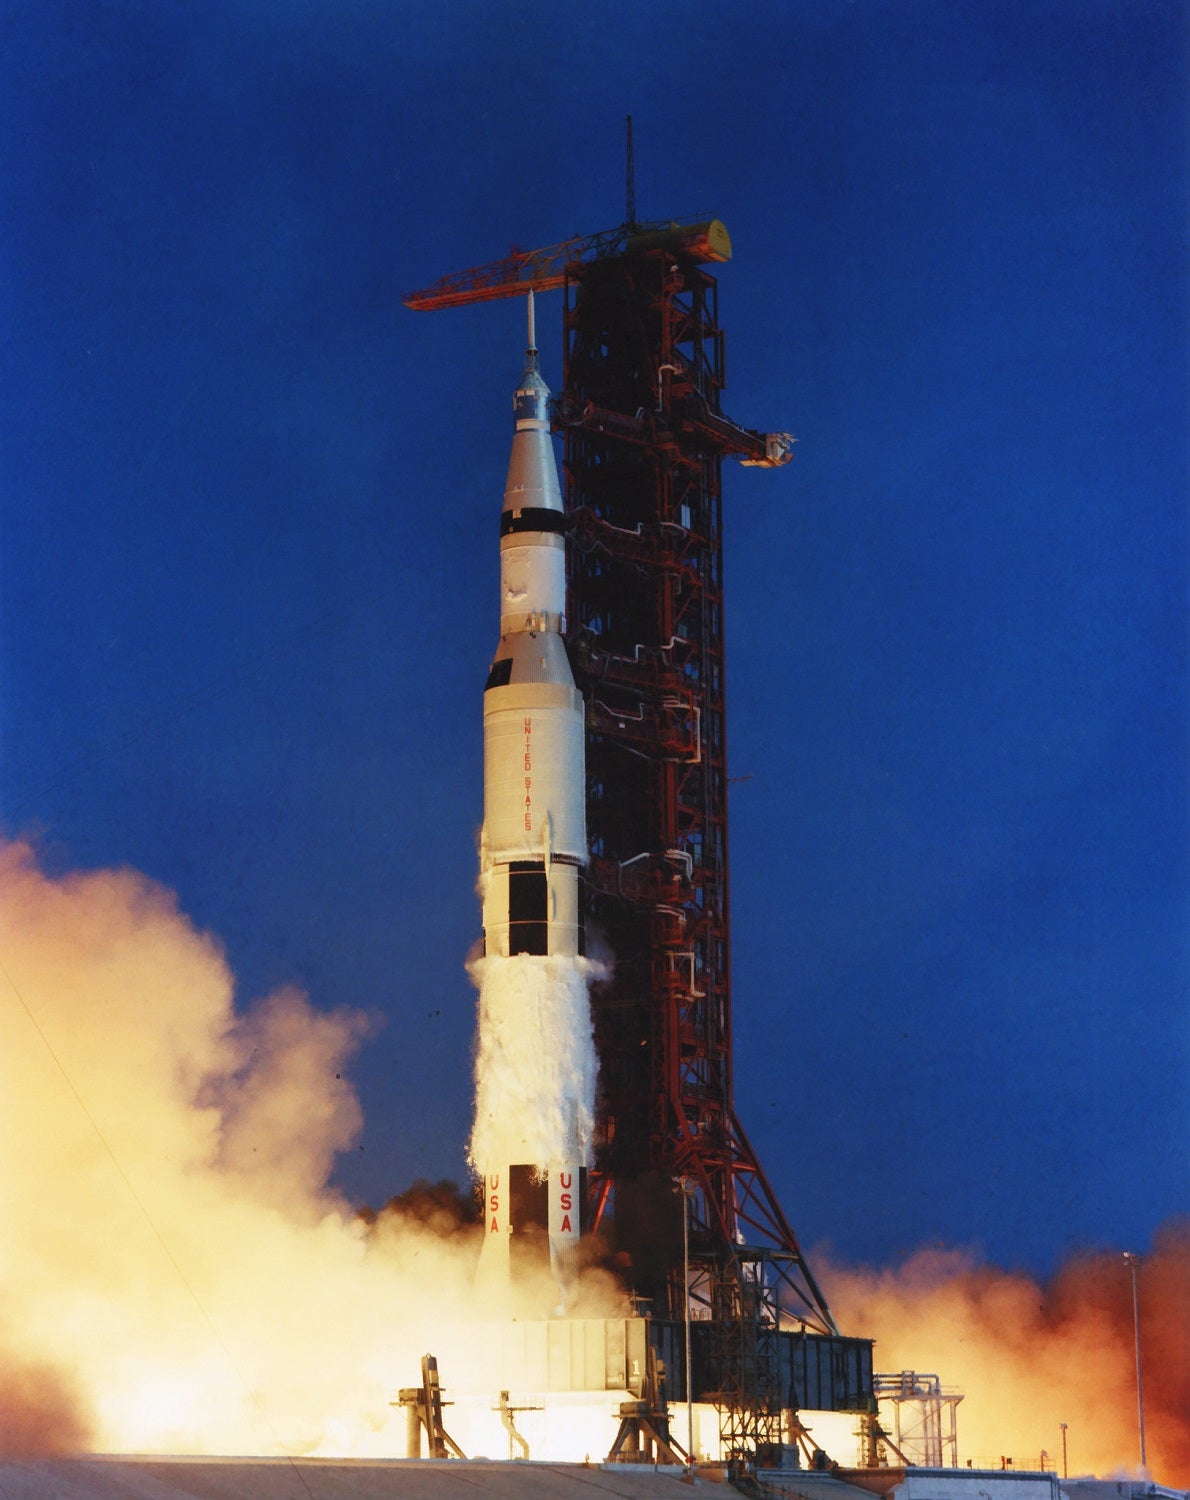 The Saturn V rocket blasts off from Cape Canaveral for the Apollo 11 mission